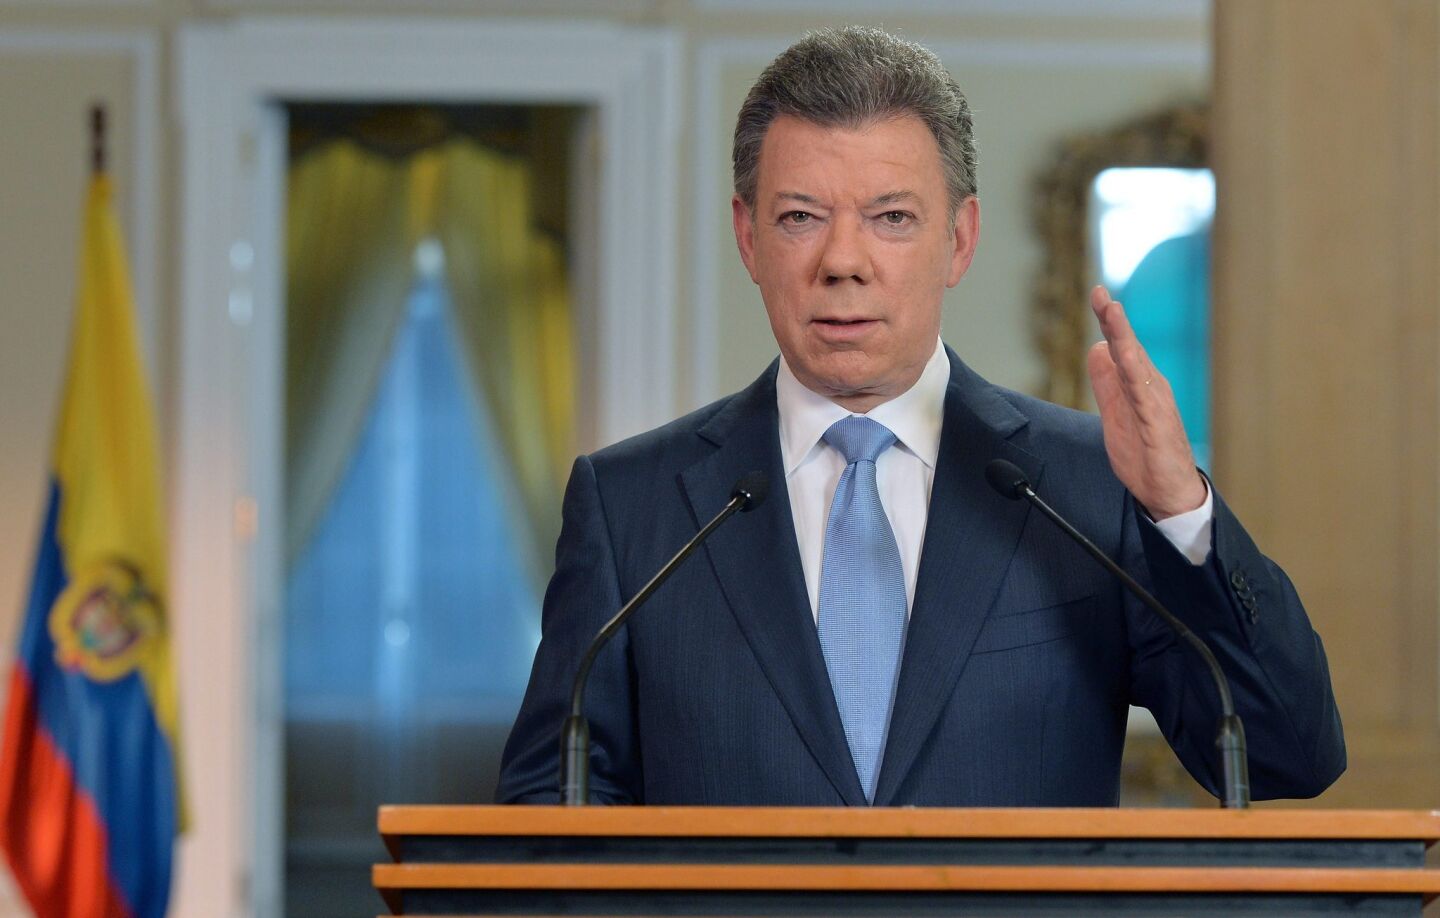 When Colombian President Juan Manuel Santos announced late last year that his government was launching peace talks with the Revolutionary Armed Forces of Colombia, the largest rebel group, many in the country were skeptical that the negotiations would yield anything. But this year, both sides reached milestone agreements on key issues. In May, the government and the FARC reached an accord on land reform, considered a crucial part of any broader accord. And in November, the two sides reached another deal establishing a basic framework under which the rebels would be allowed to participate in the country's political life. Much work remains to be done, but this year has offered real hope that Colombia's decades-long conflict may finally come to an end. Above: Santos speaks during a national TV and radio broadcasting in Bogota on Nov. 6. RELATED: Ted Rall's five best cartoons of 2013 Washington's 5 biggest 'fails' of 2013 2013 endings: Columnist Patt Morrison on what she won't miss